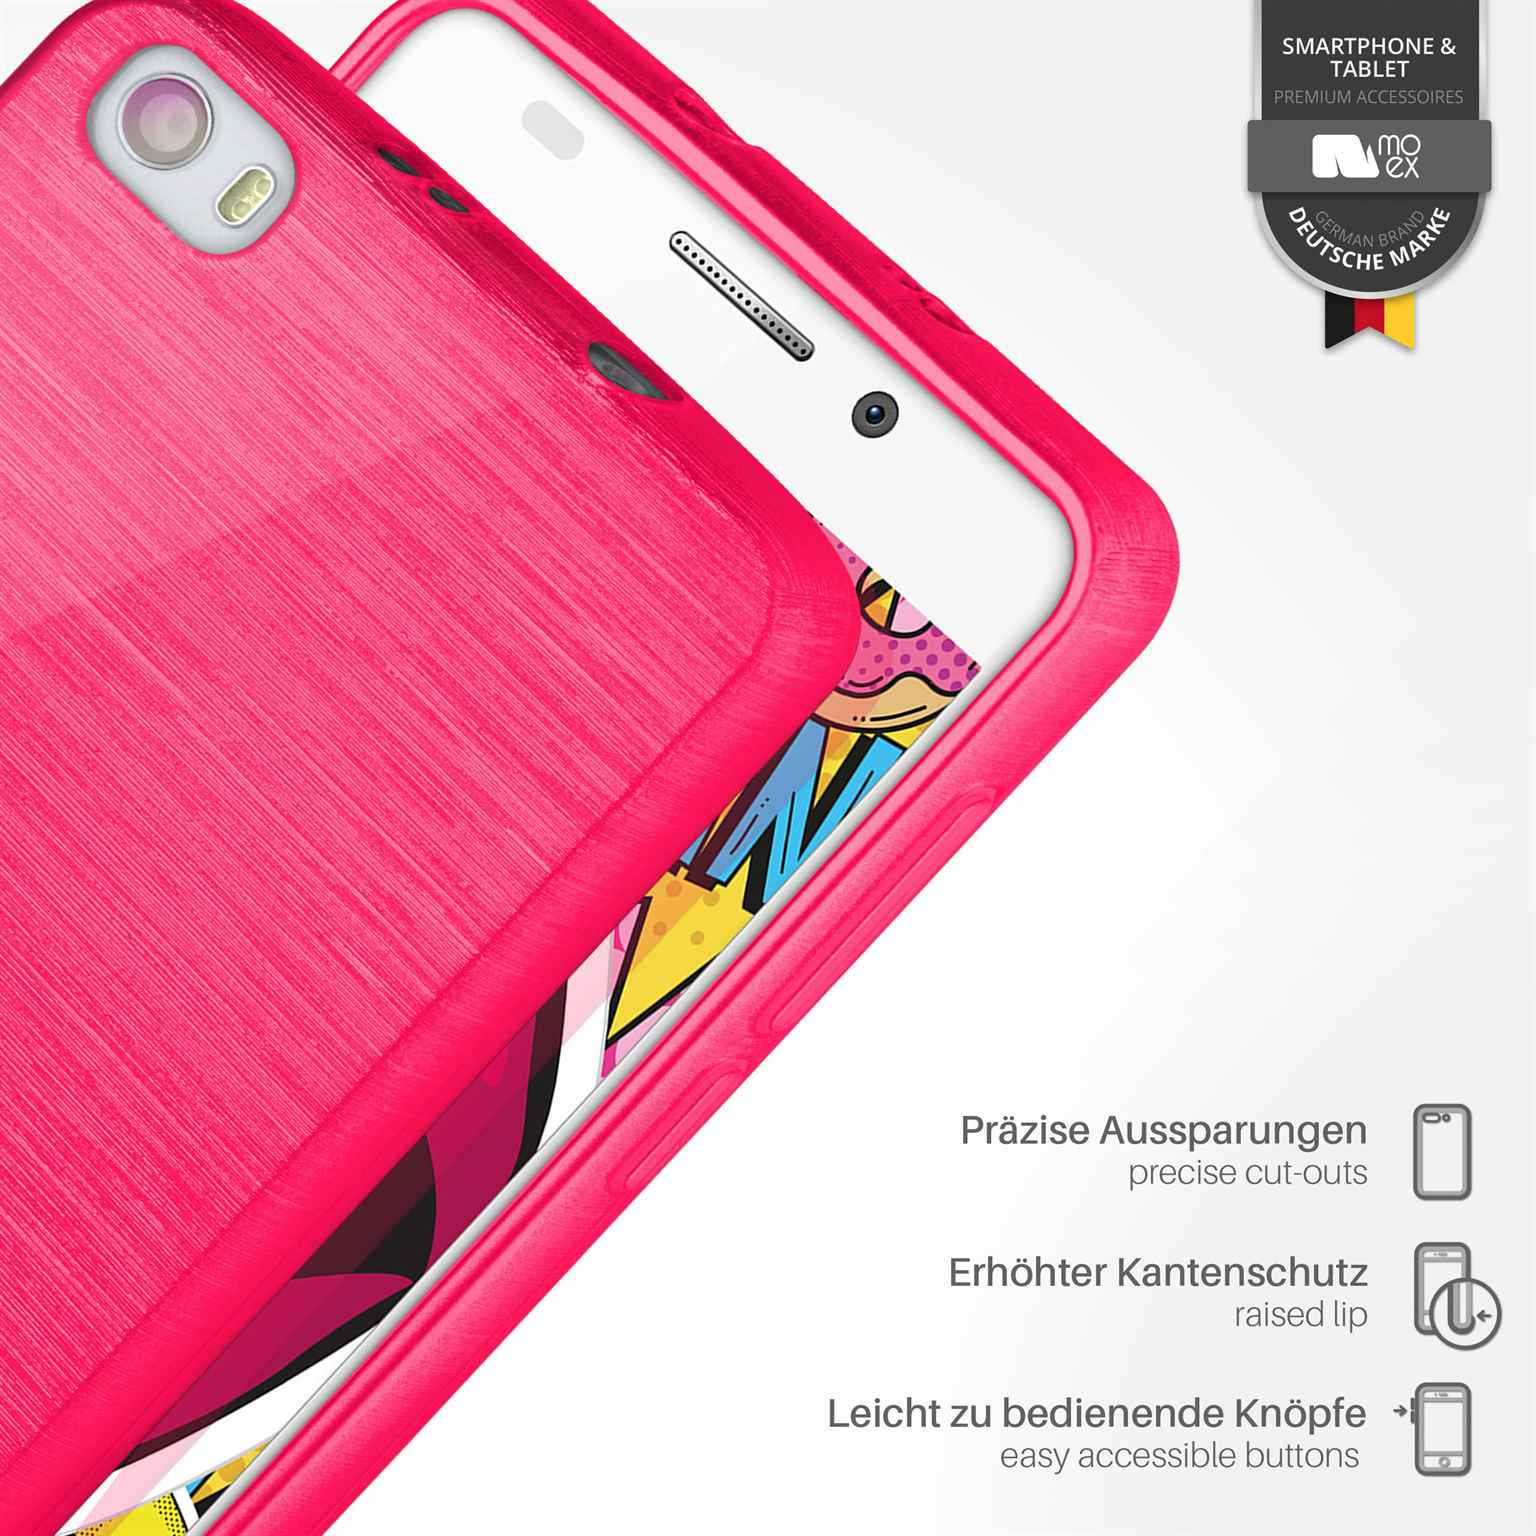 Backcover, Honor 6, Magenta-Pink Brushed MOEX Huawei, Case,